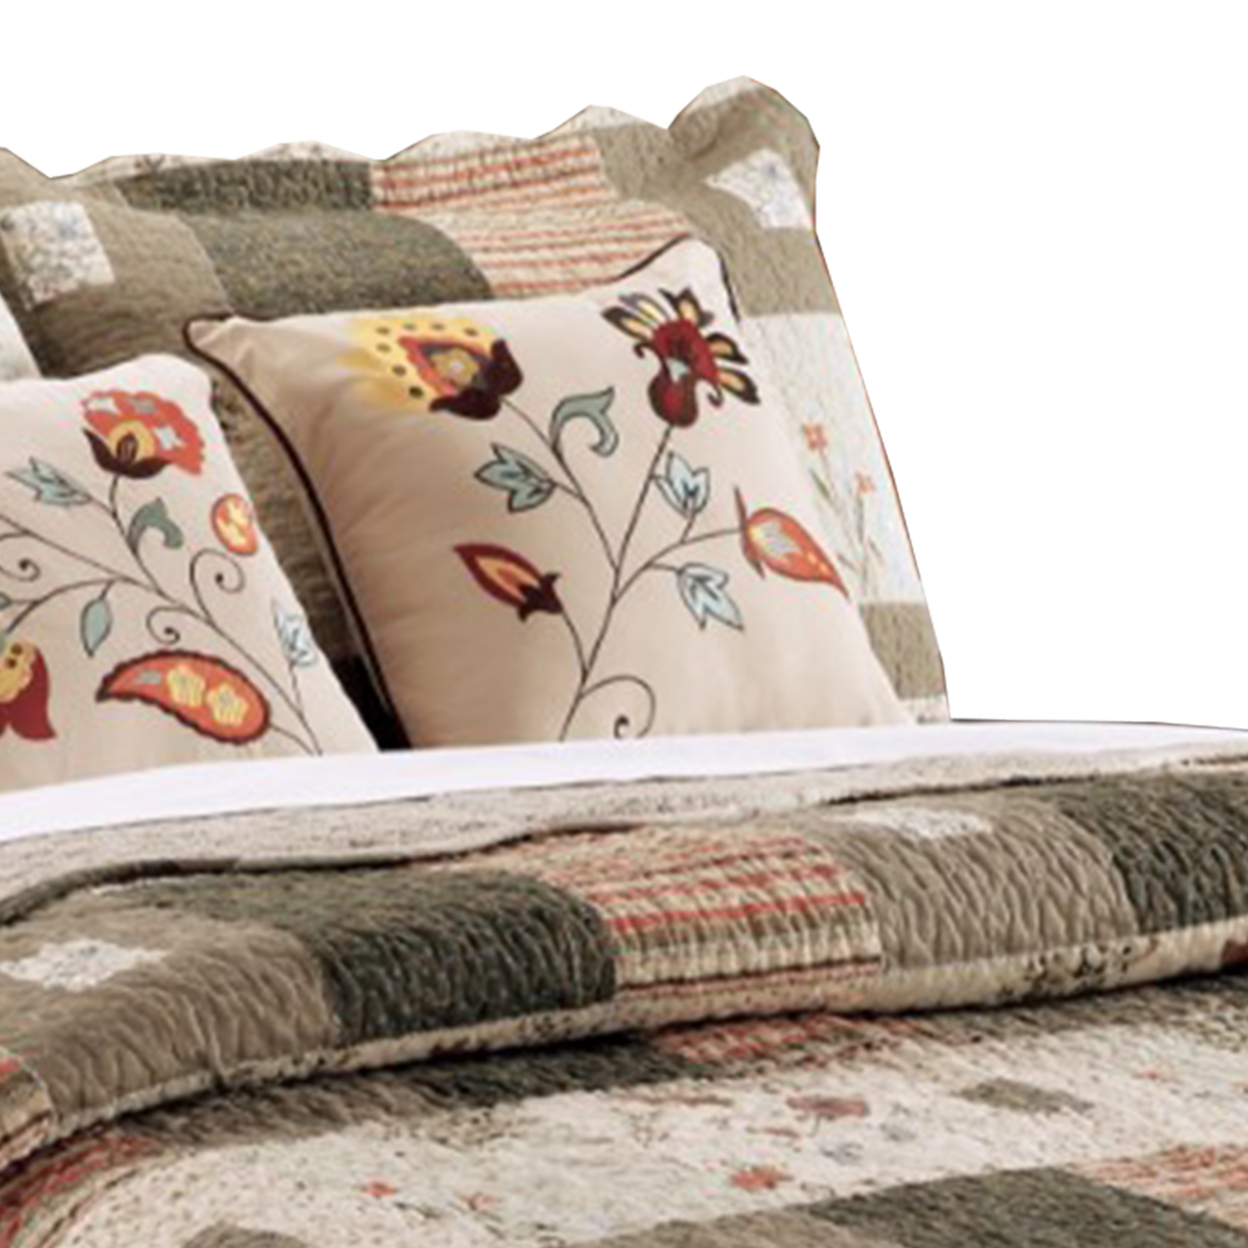 Douro Fabric 4 Piece Twin Quilt Set With Floral Print And Scalloped Edges,Brown- Saltoro Sherpi